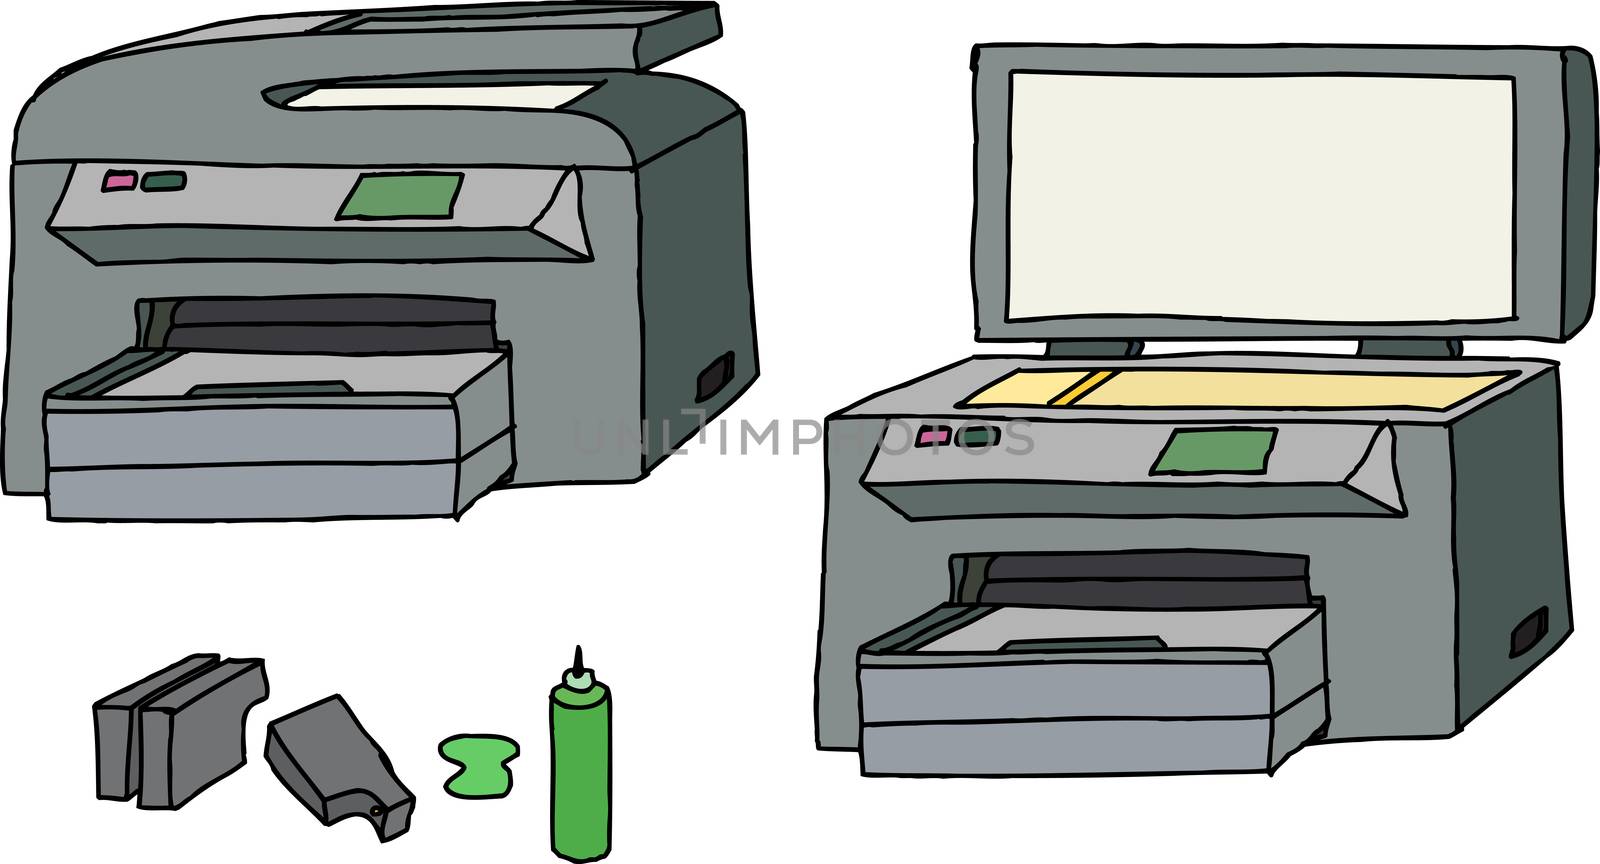 All In One Printer by TheBlackRhino